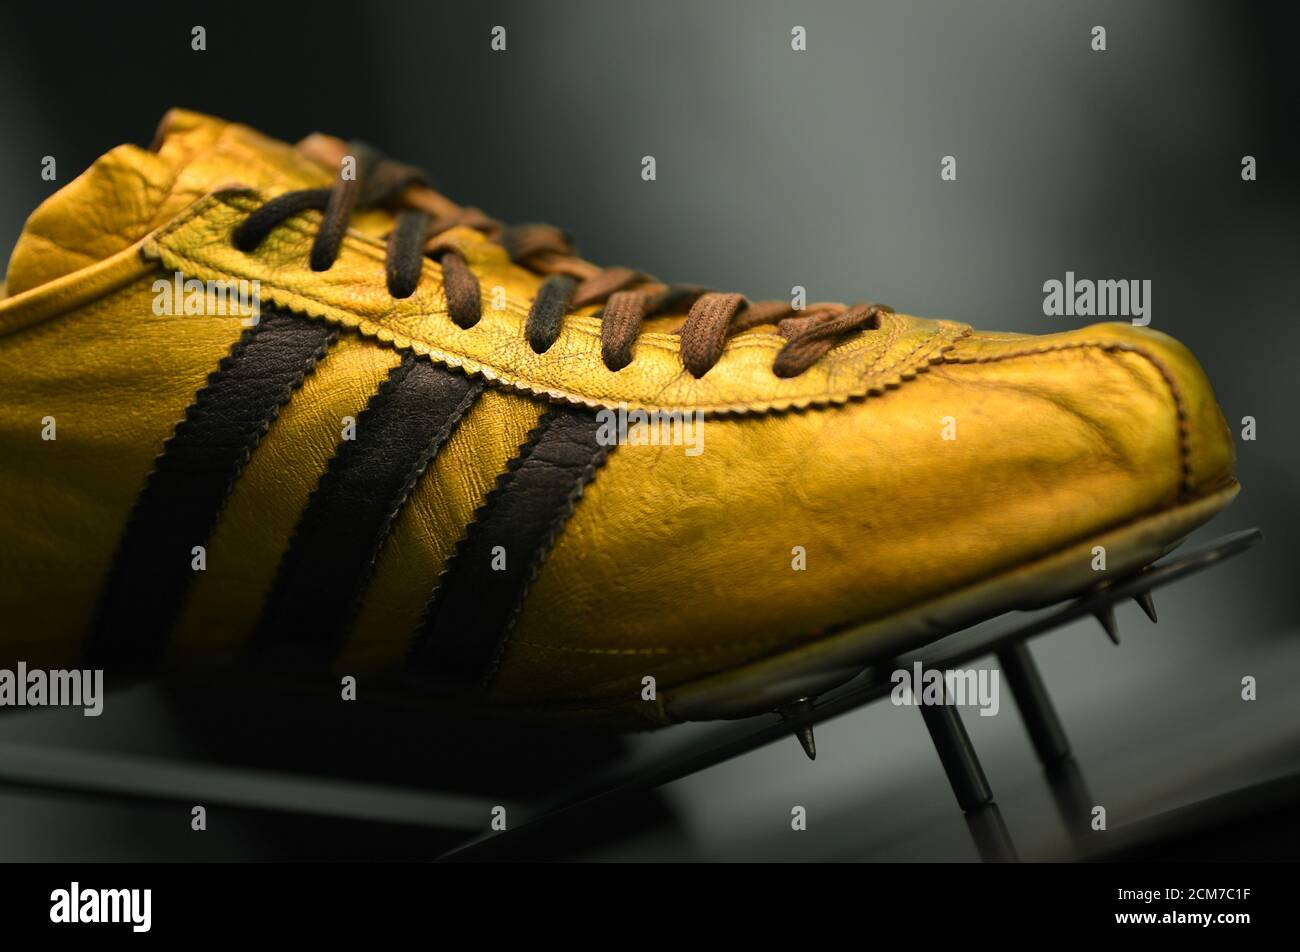 The Adidas shoe Azteca Gold 1968 is displayed during celebrations for  German sports apparel maker Adidas'